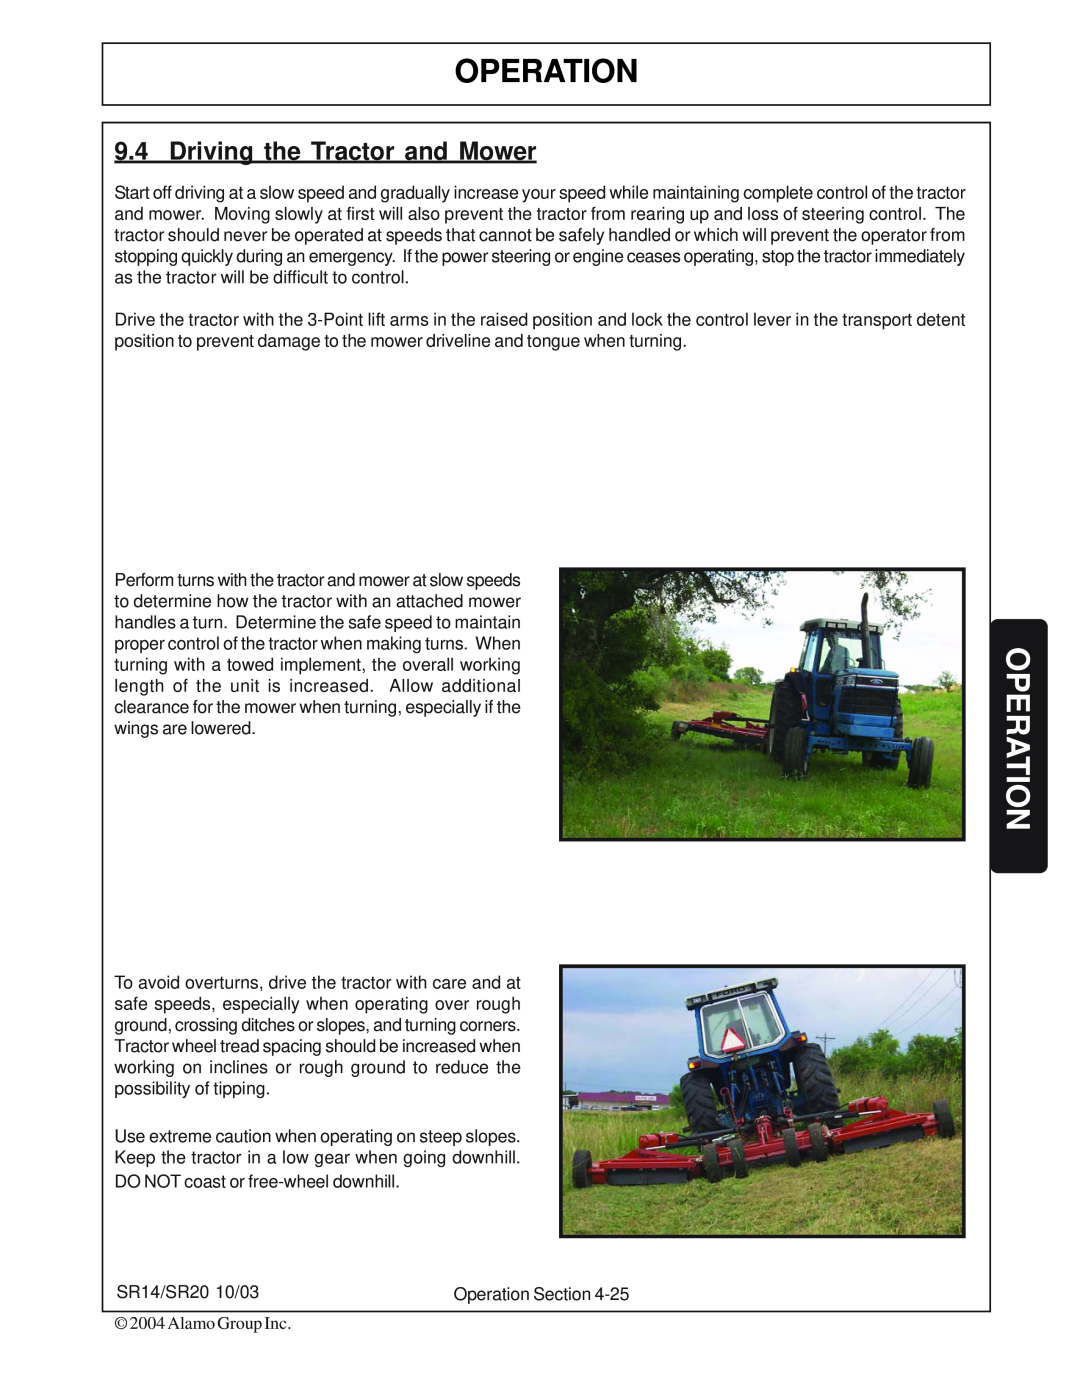 Alamo SR14, SR20 manual Operation, Driving the Tractor and Mower 